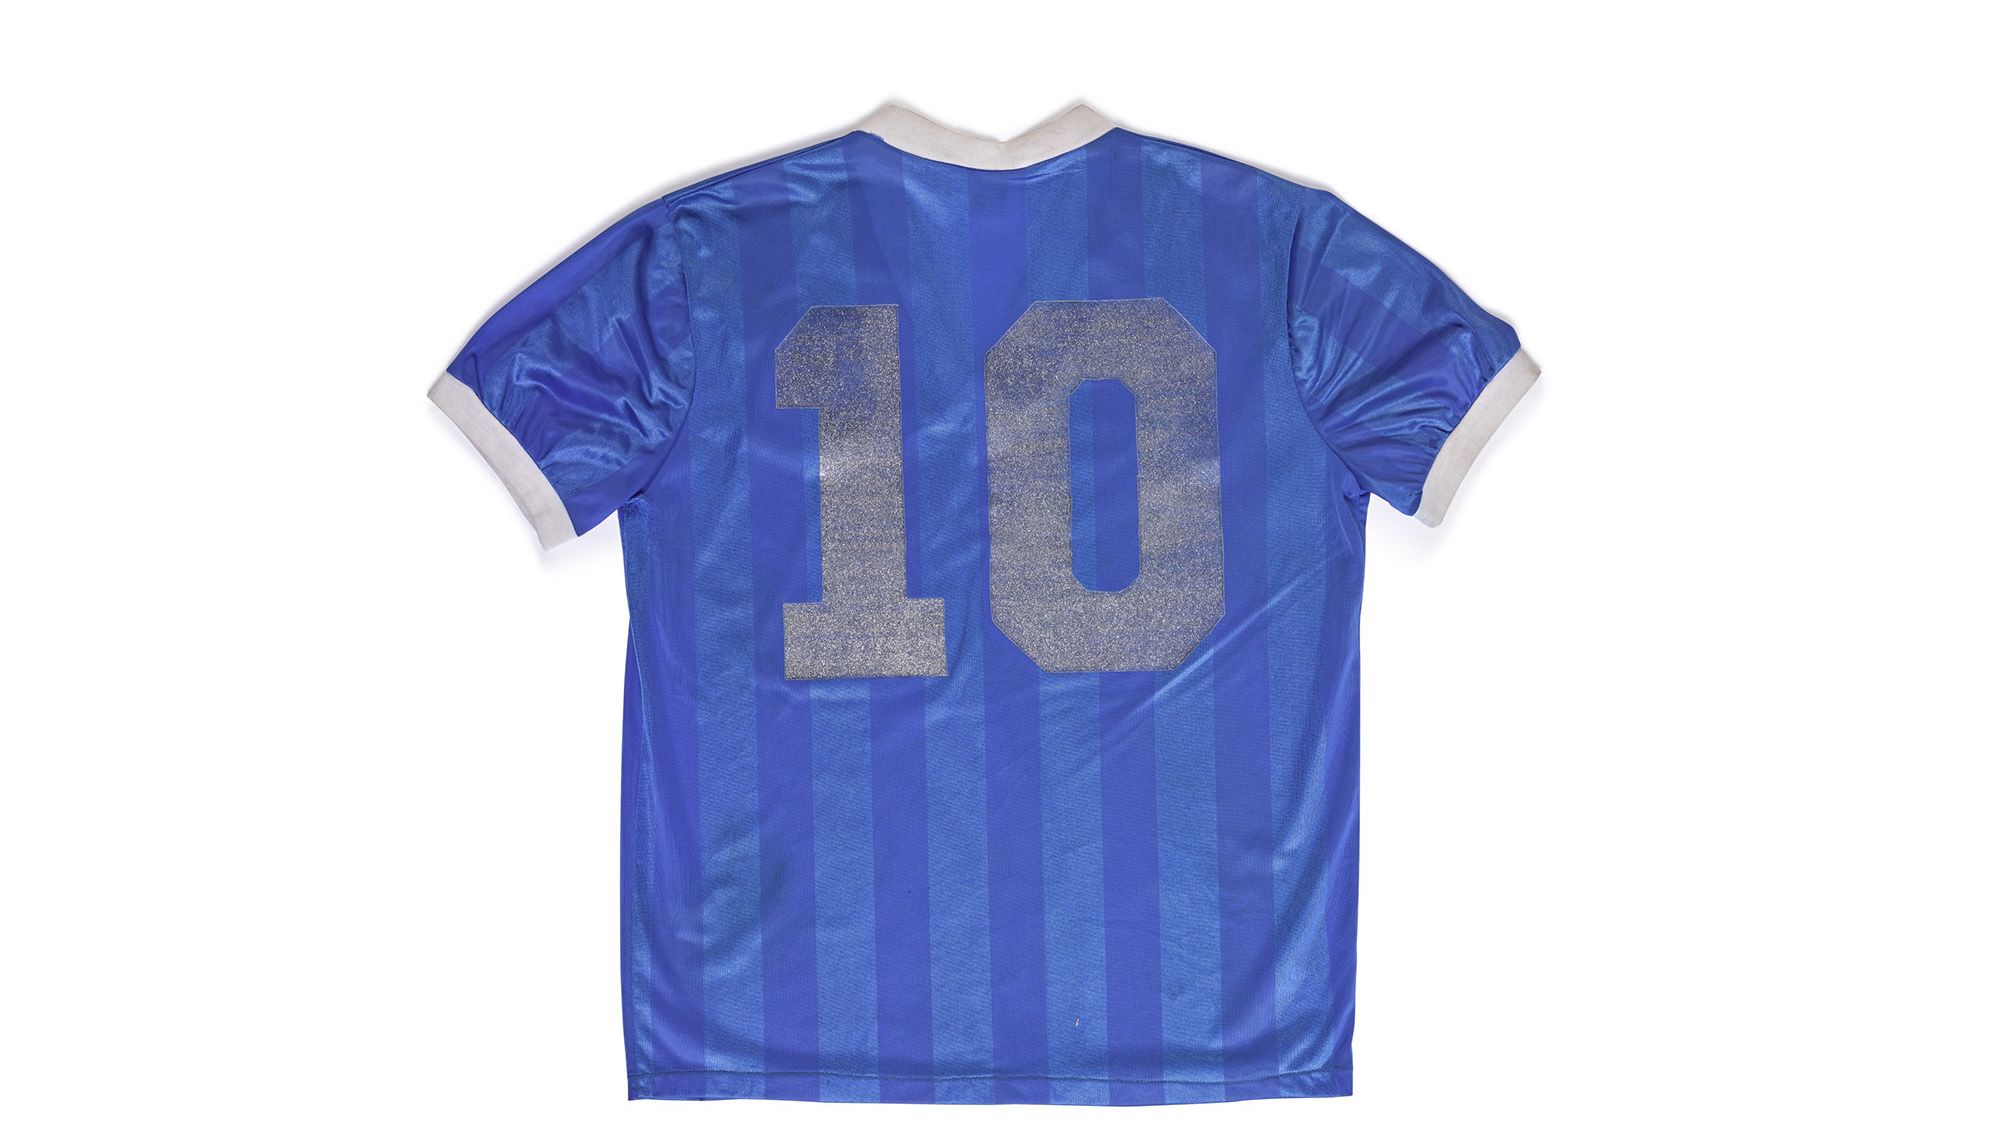 Diego Maradona's iconic 'Hand of God' shirt sells for record-breaking $9.3  million at online auction